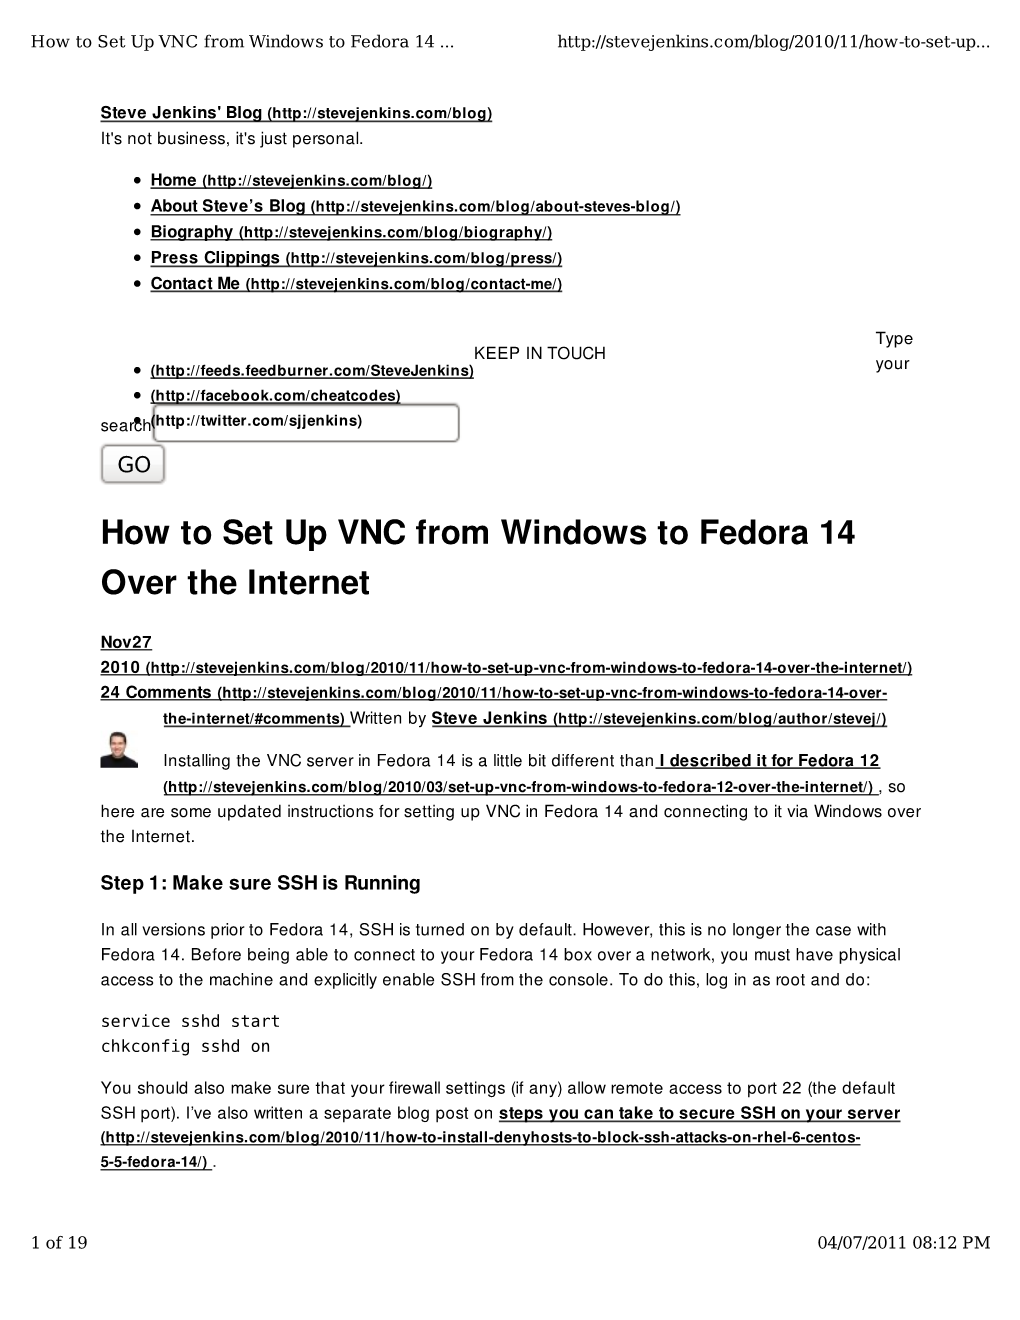 How to Set up VNC from Windows to Fedora 14 Over the Internet